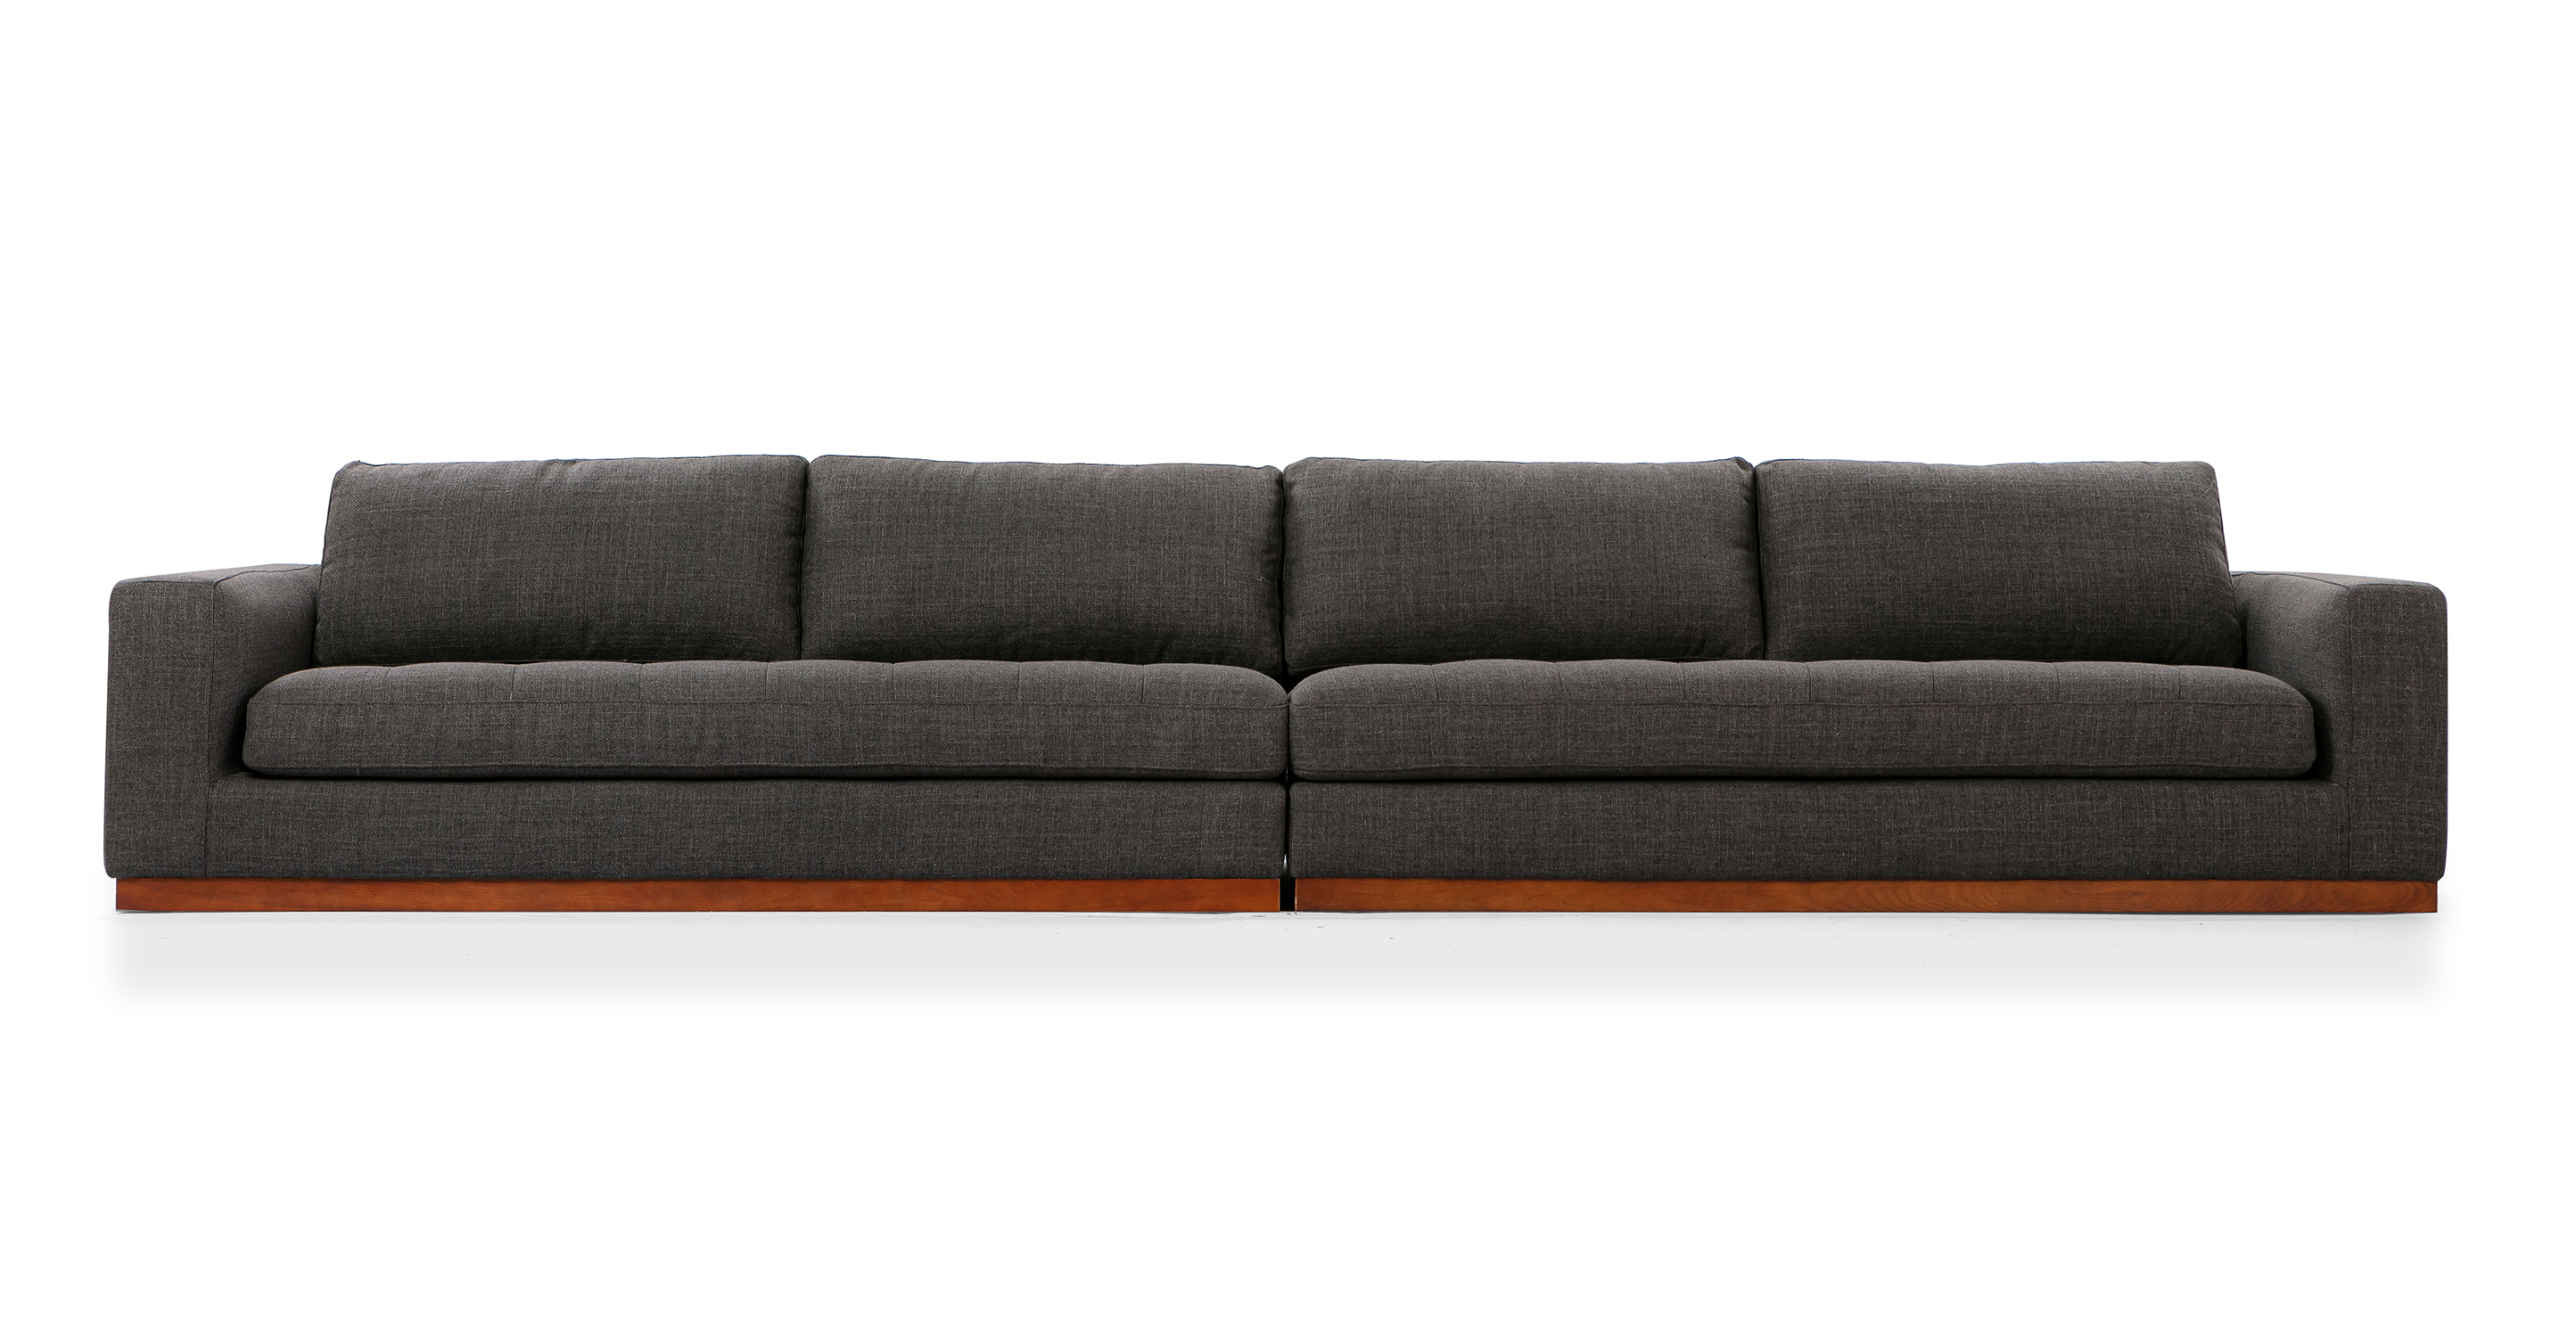 The Newport Dior Grey floor sofa series offers a substantial and solid feel. The base of the sofa series is crafted from walnut wood, providing a sturdy and stylish foundation. The modular design allows for flexibility in configuring the components to suit your preferences and space.
Each component of the series features an upholstered base that is attached to the wooden frame, combining both comfort and durability. The seat and back cushions are removable, allowing for easy customization and cleaning.
The arms of the sofa pieces are rectangular, providing a clean and contemporary aesthetic.
In the Newport 4 series, two single arm sofas connect to provide a long continuous sofa experience.